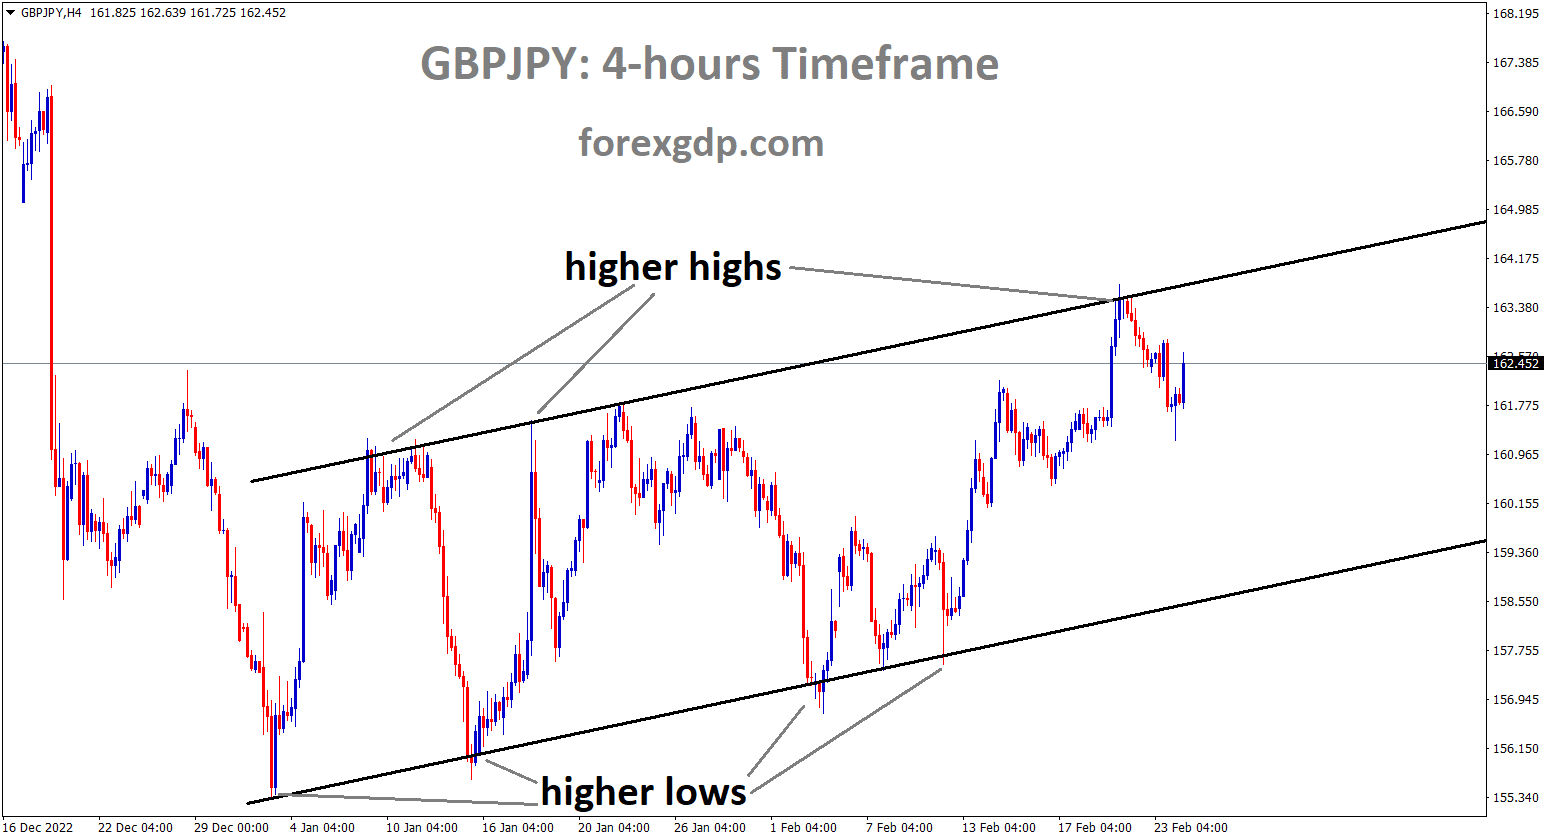 GBPJPY is moving in a Ascending channel and the market has fallen from the higher high area of the channel.